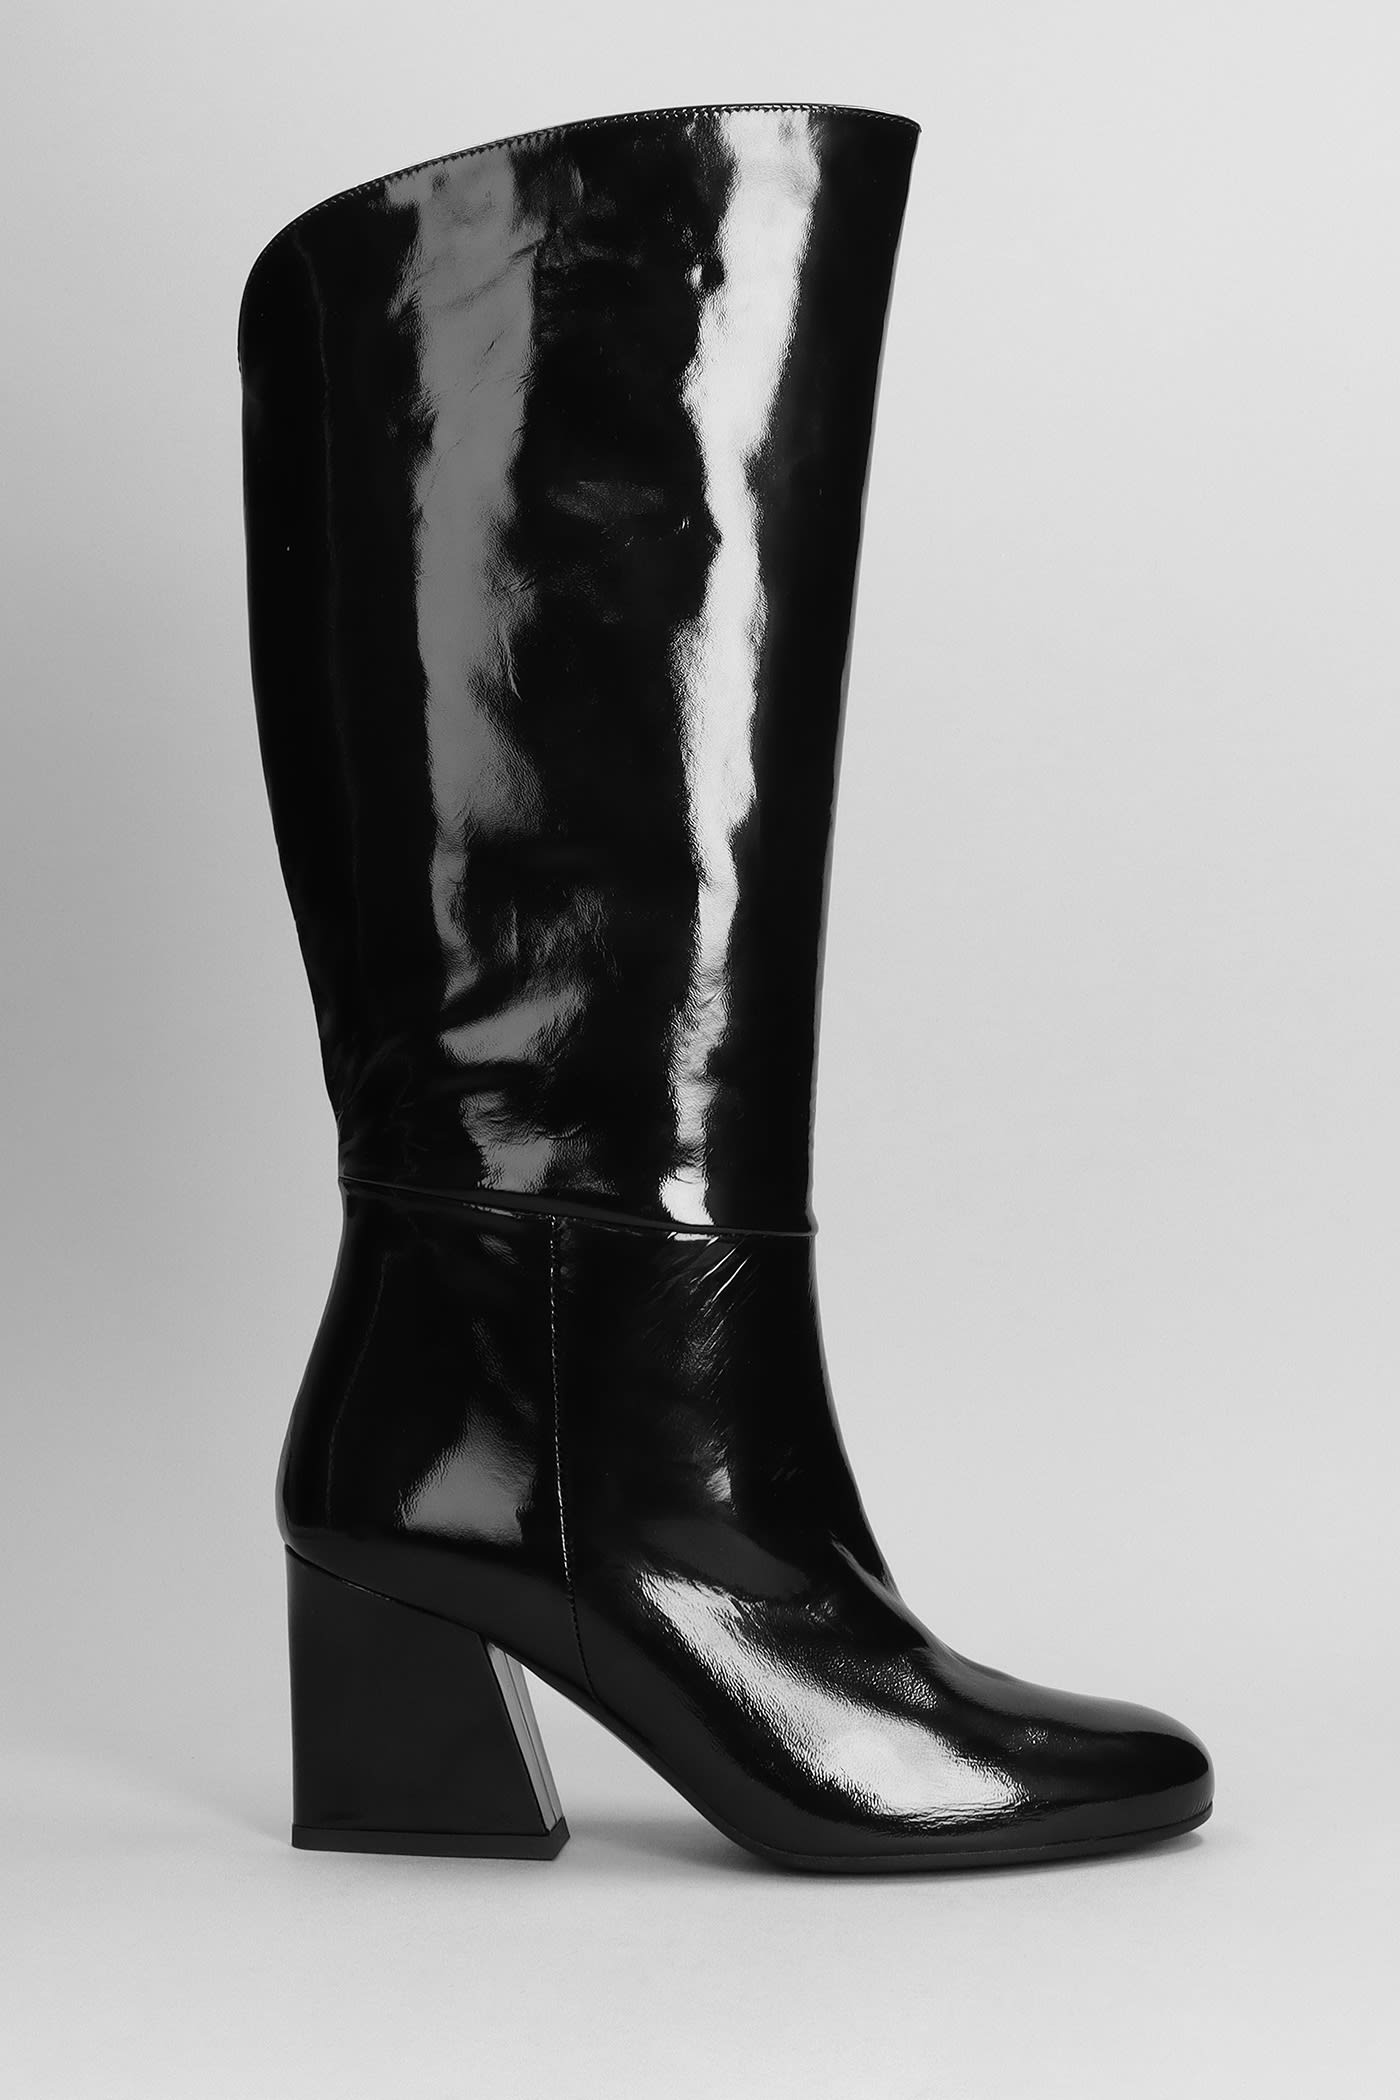 High Heels Boots In Black Patent Leather